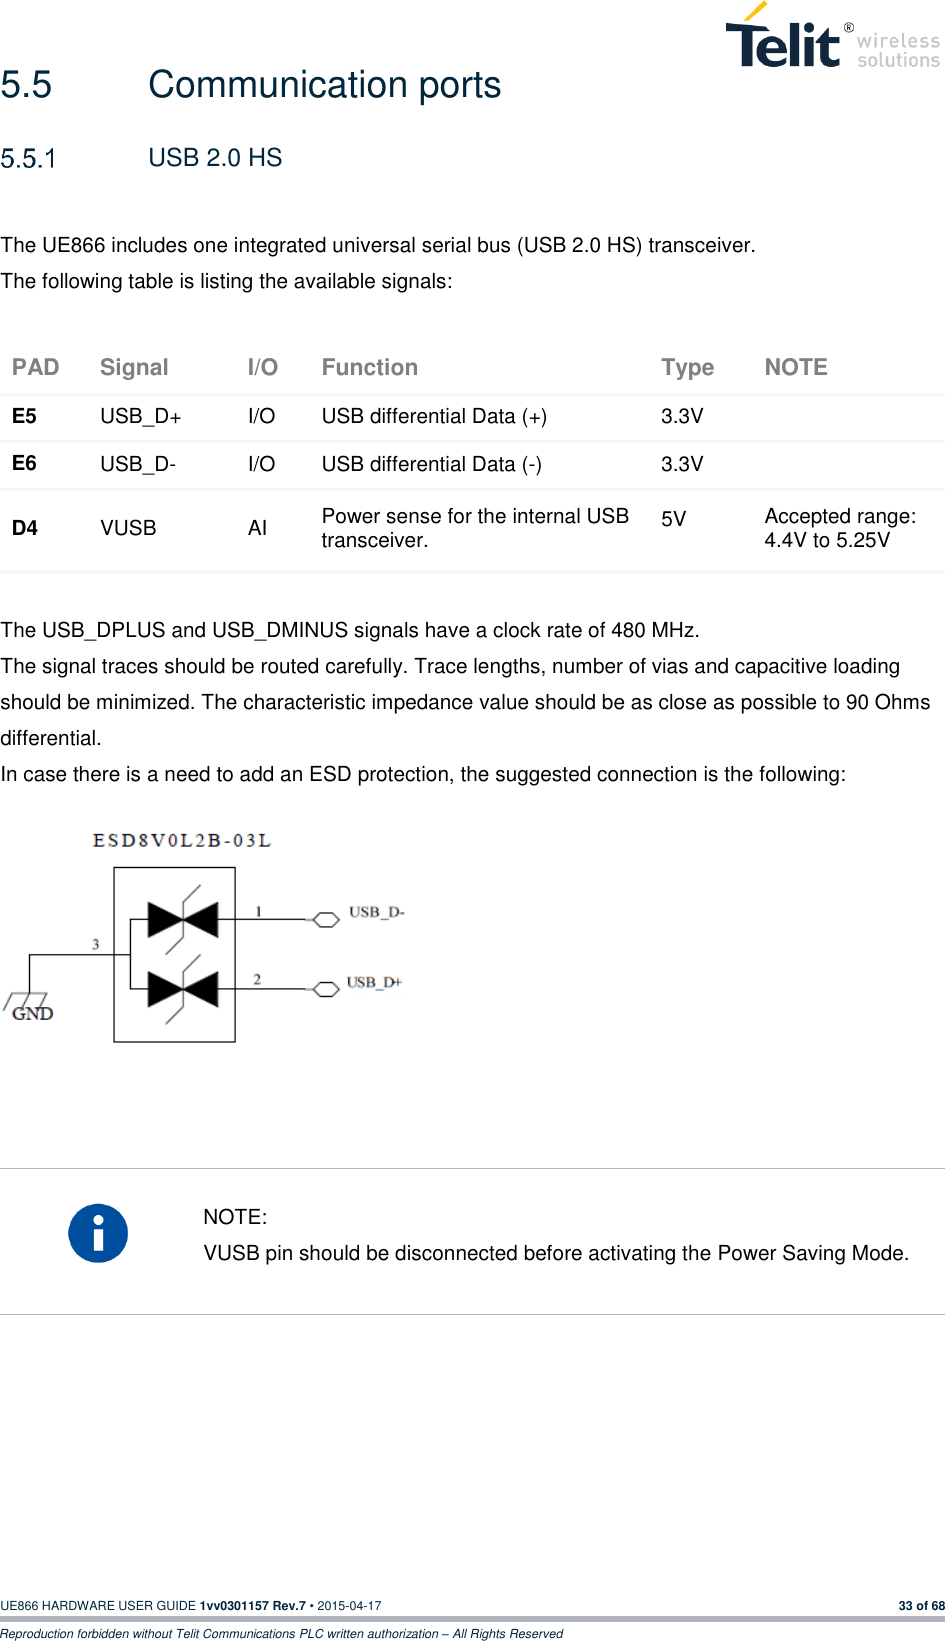  UE866 HARDWARE USER GUIDE 1vv0301157 Rev.7 • 2015-04-17 33 of 68 Reproduction forbidden without Telit Communications PLC written authorization – All Rights Reserved 5.5  Communication ports   USB 2.0 HS  The UE866 includes one integrated universal serial bus (USB 2.0 HS) transceiver. The following table is listing the available signals: PAD Signal I/O Function Type NOTE E5 USB_D+ I/O USB differential Data (+) 3.3V  E6 USB_D- I/O USB differential Data (-) 3.3V  D4 VUSB AI Power sense for the internal USB transceiver. 5V Accepted range: 4.4V to 5.25V  The USB_DPLUS and USB_DMINUS signals have a clock rate of 480 MHz.  The signal traces should be routed carefully. Trace lengths, number of vias and capacitive loading should be minimized. The characteristic impedance value should be as close as possible to 90 Ohms differential.  In case there is a need to add an ESD protection, the suggested connection is the following:               NOTE: VUSB pin should be disconnected before activating the Power Saving Mode.        